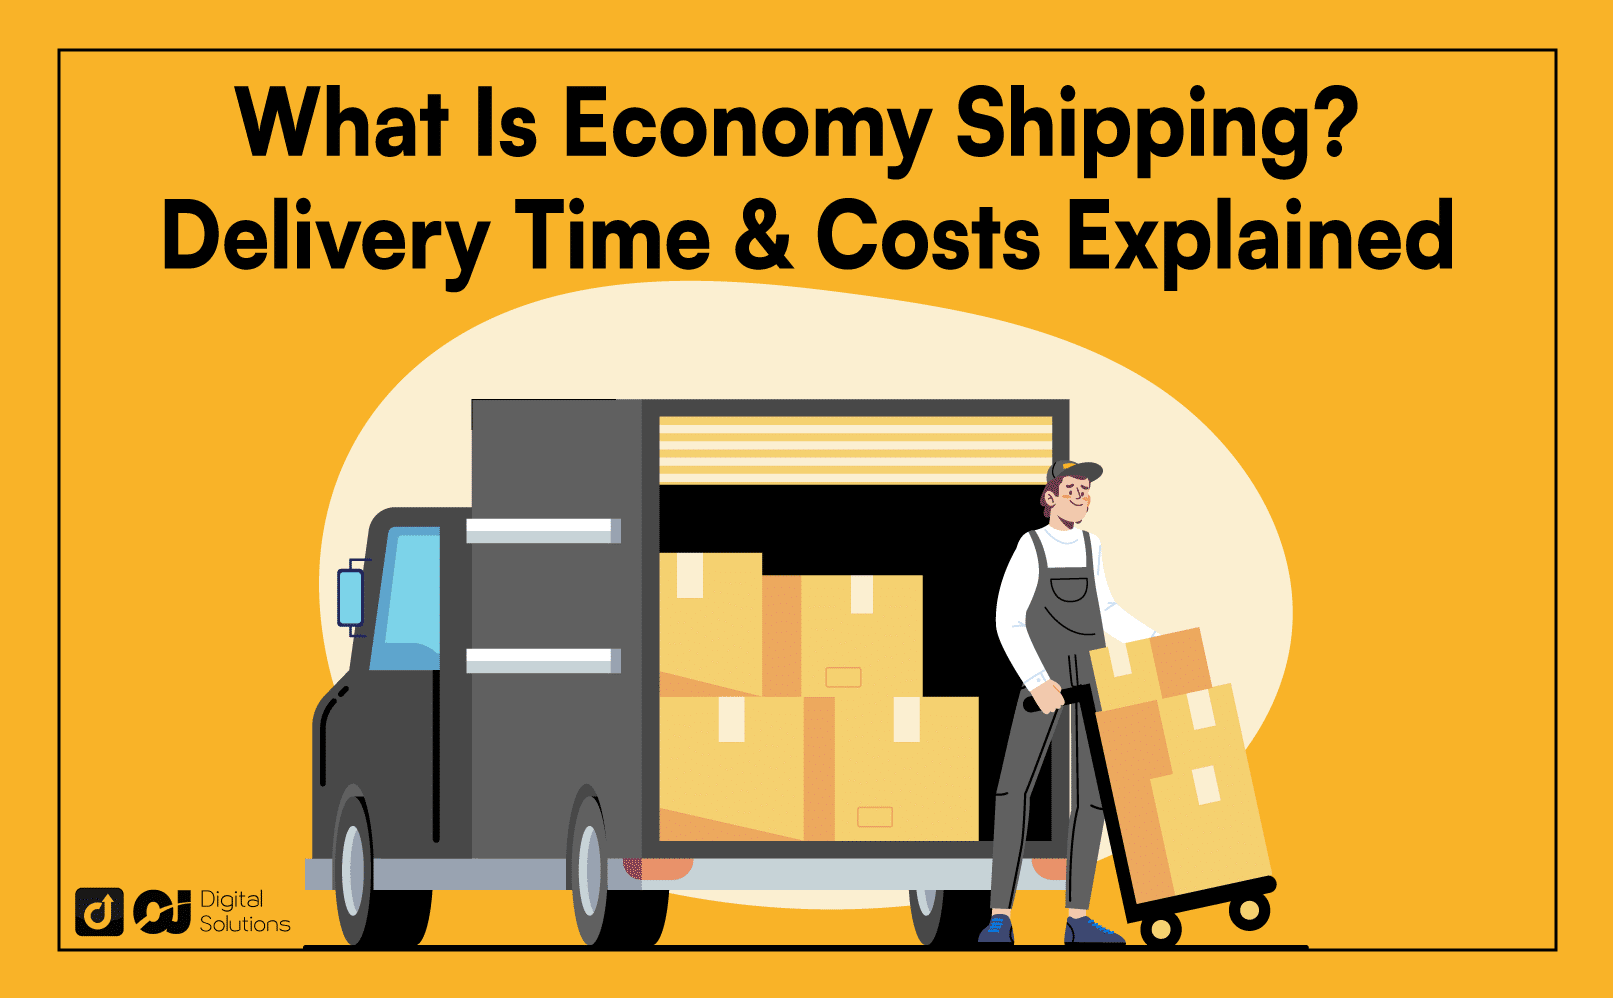 What Is Economy Shipping